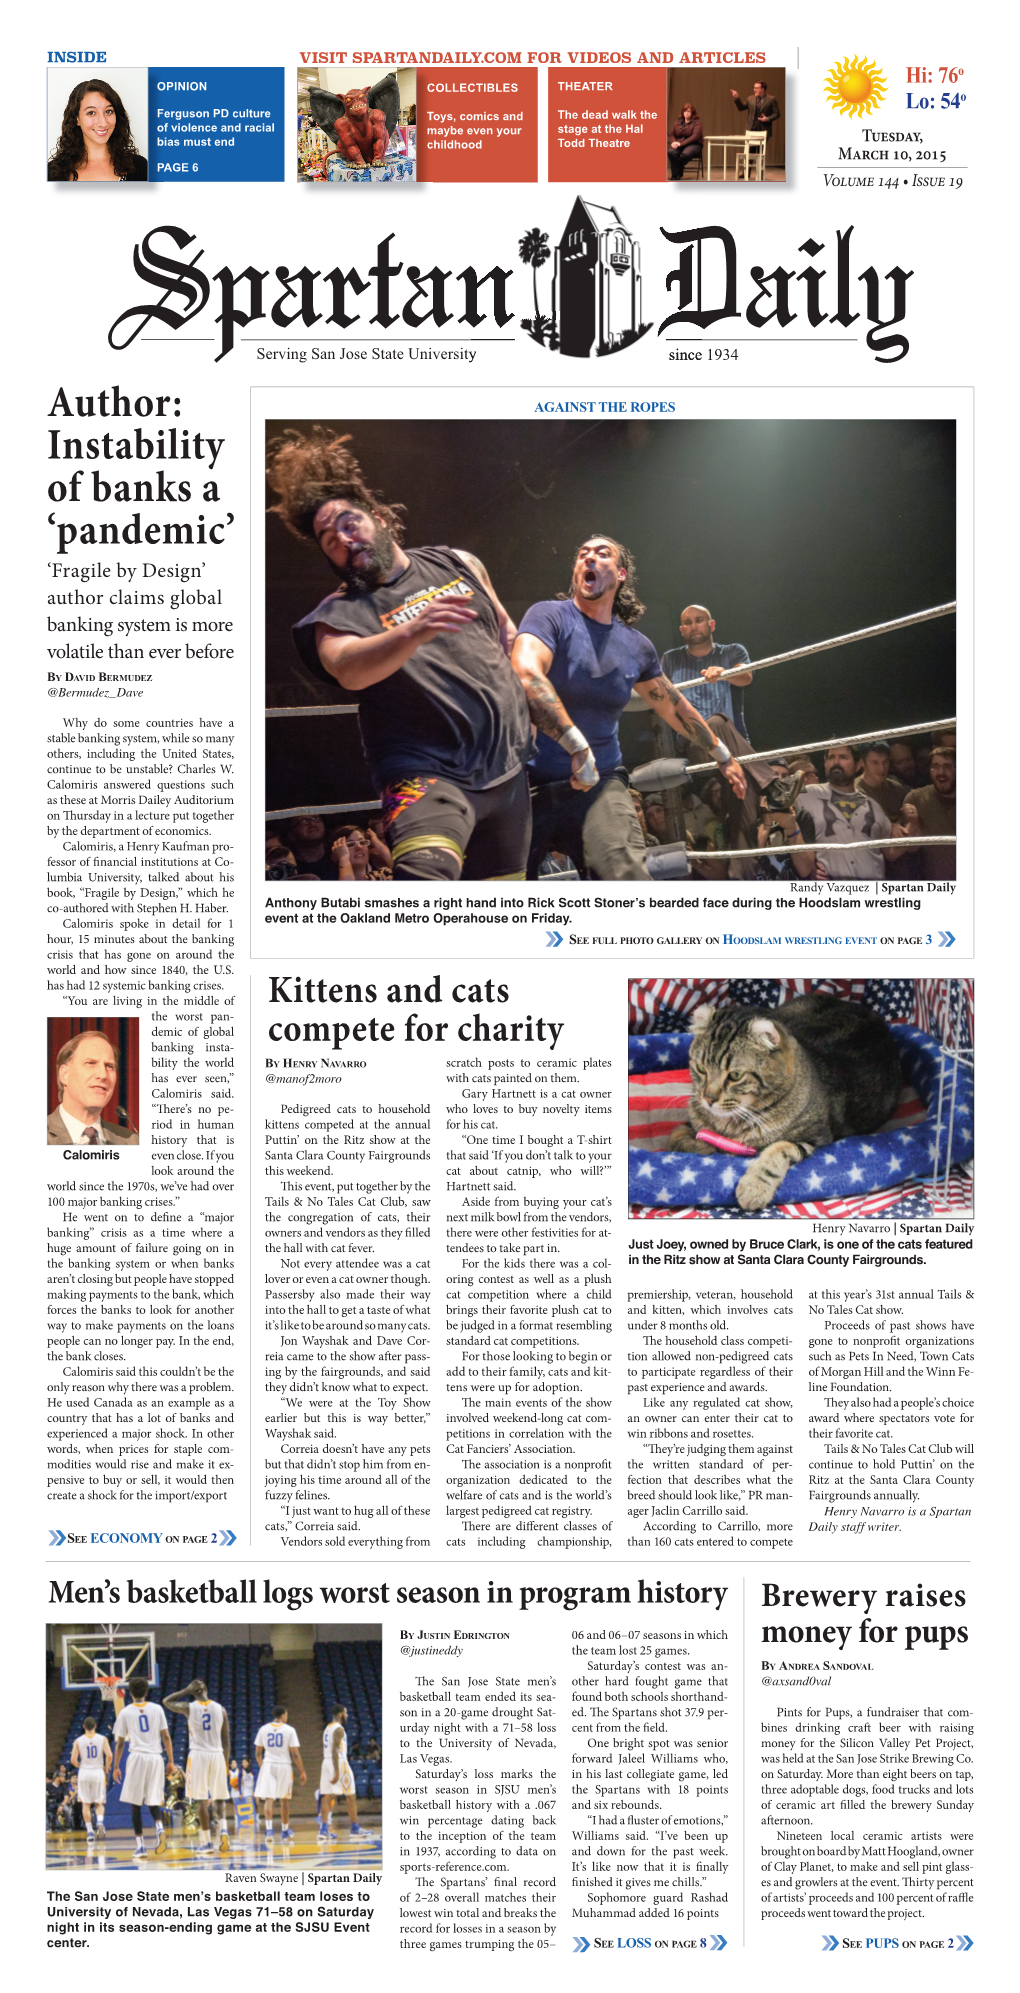 Spartan Daily, March 10, 2015